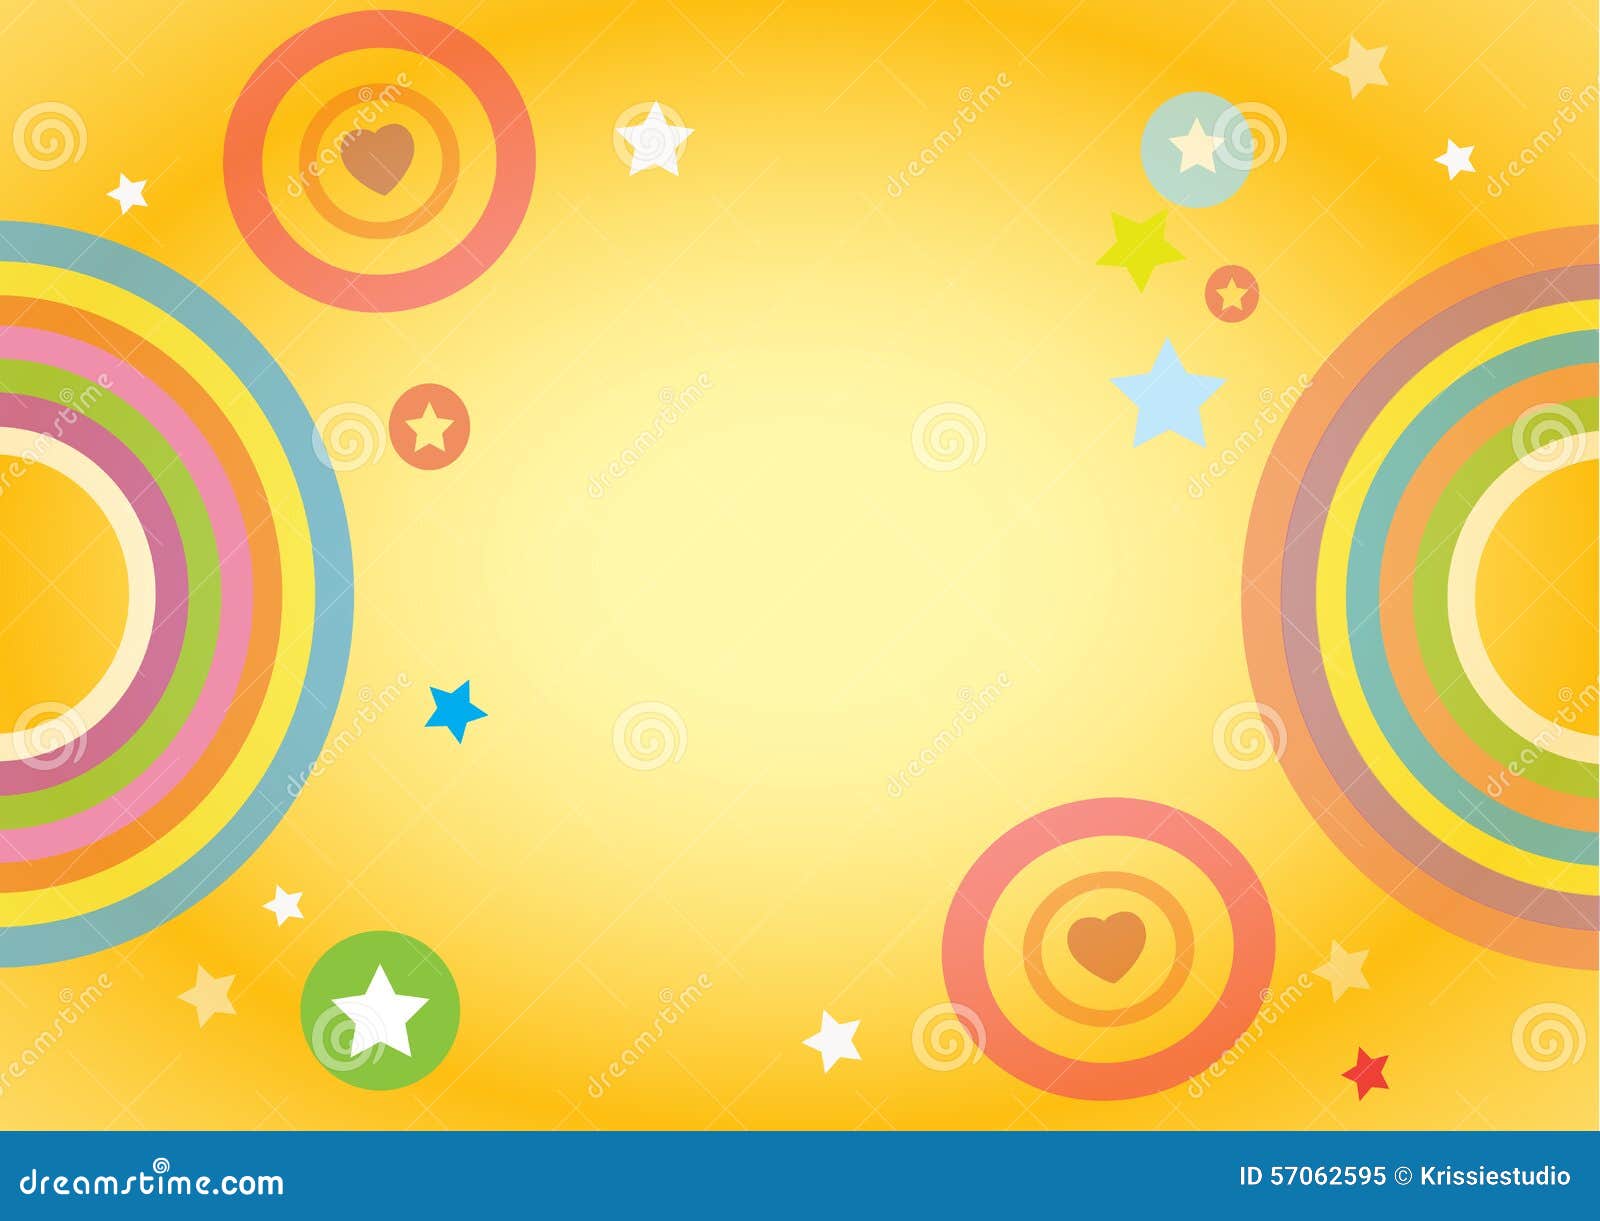 Colorful Designs For Backgrounds For Kids